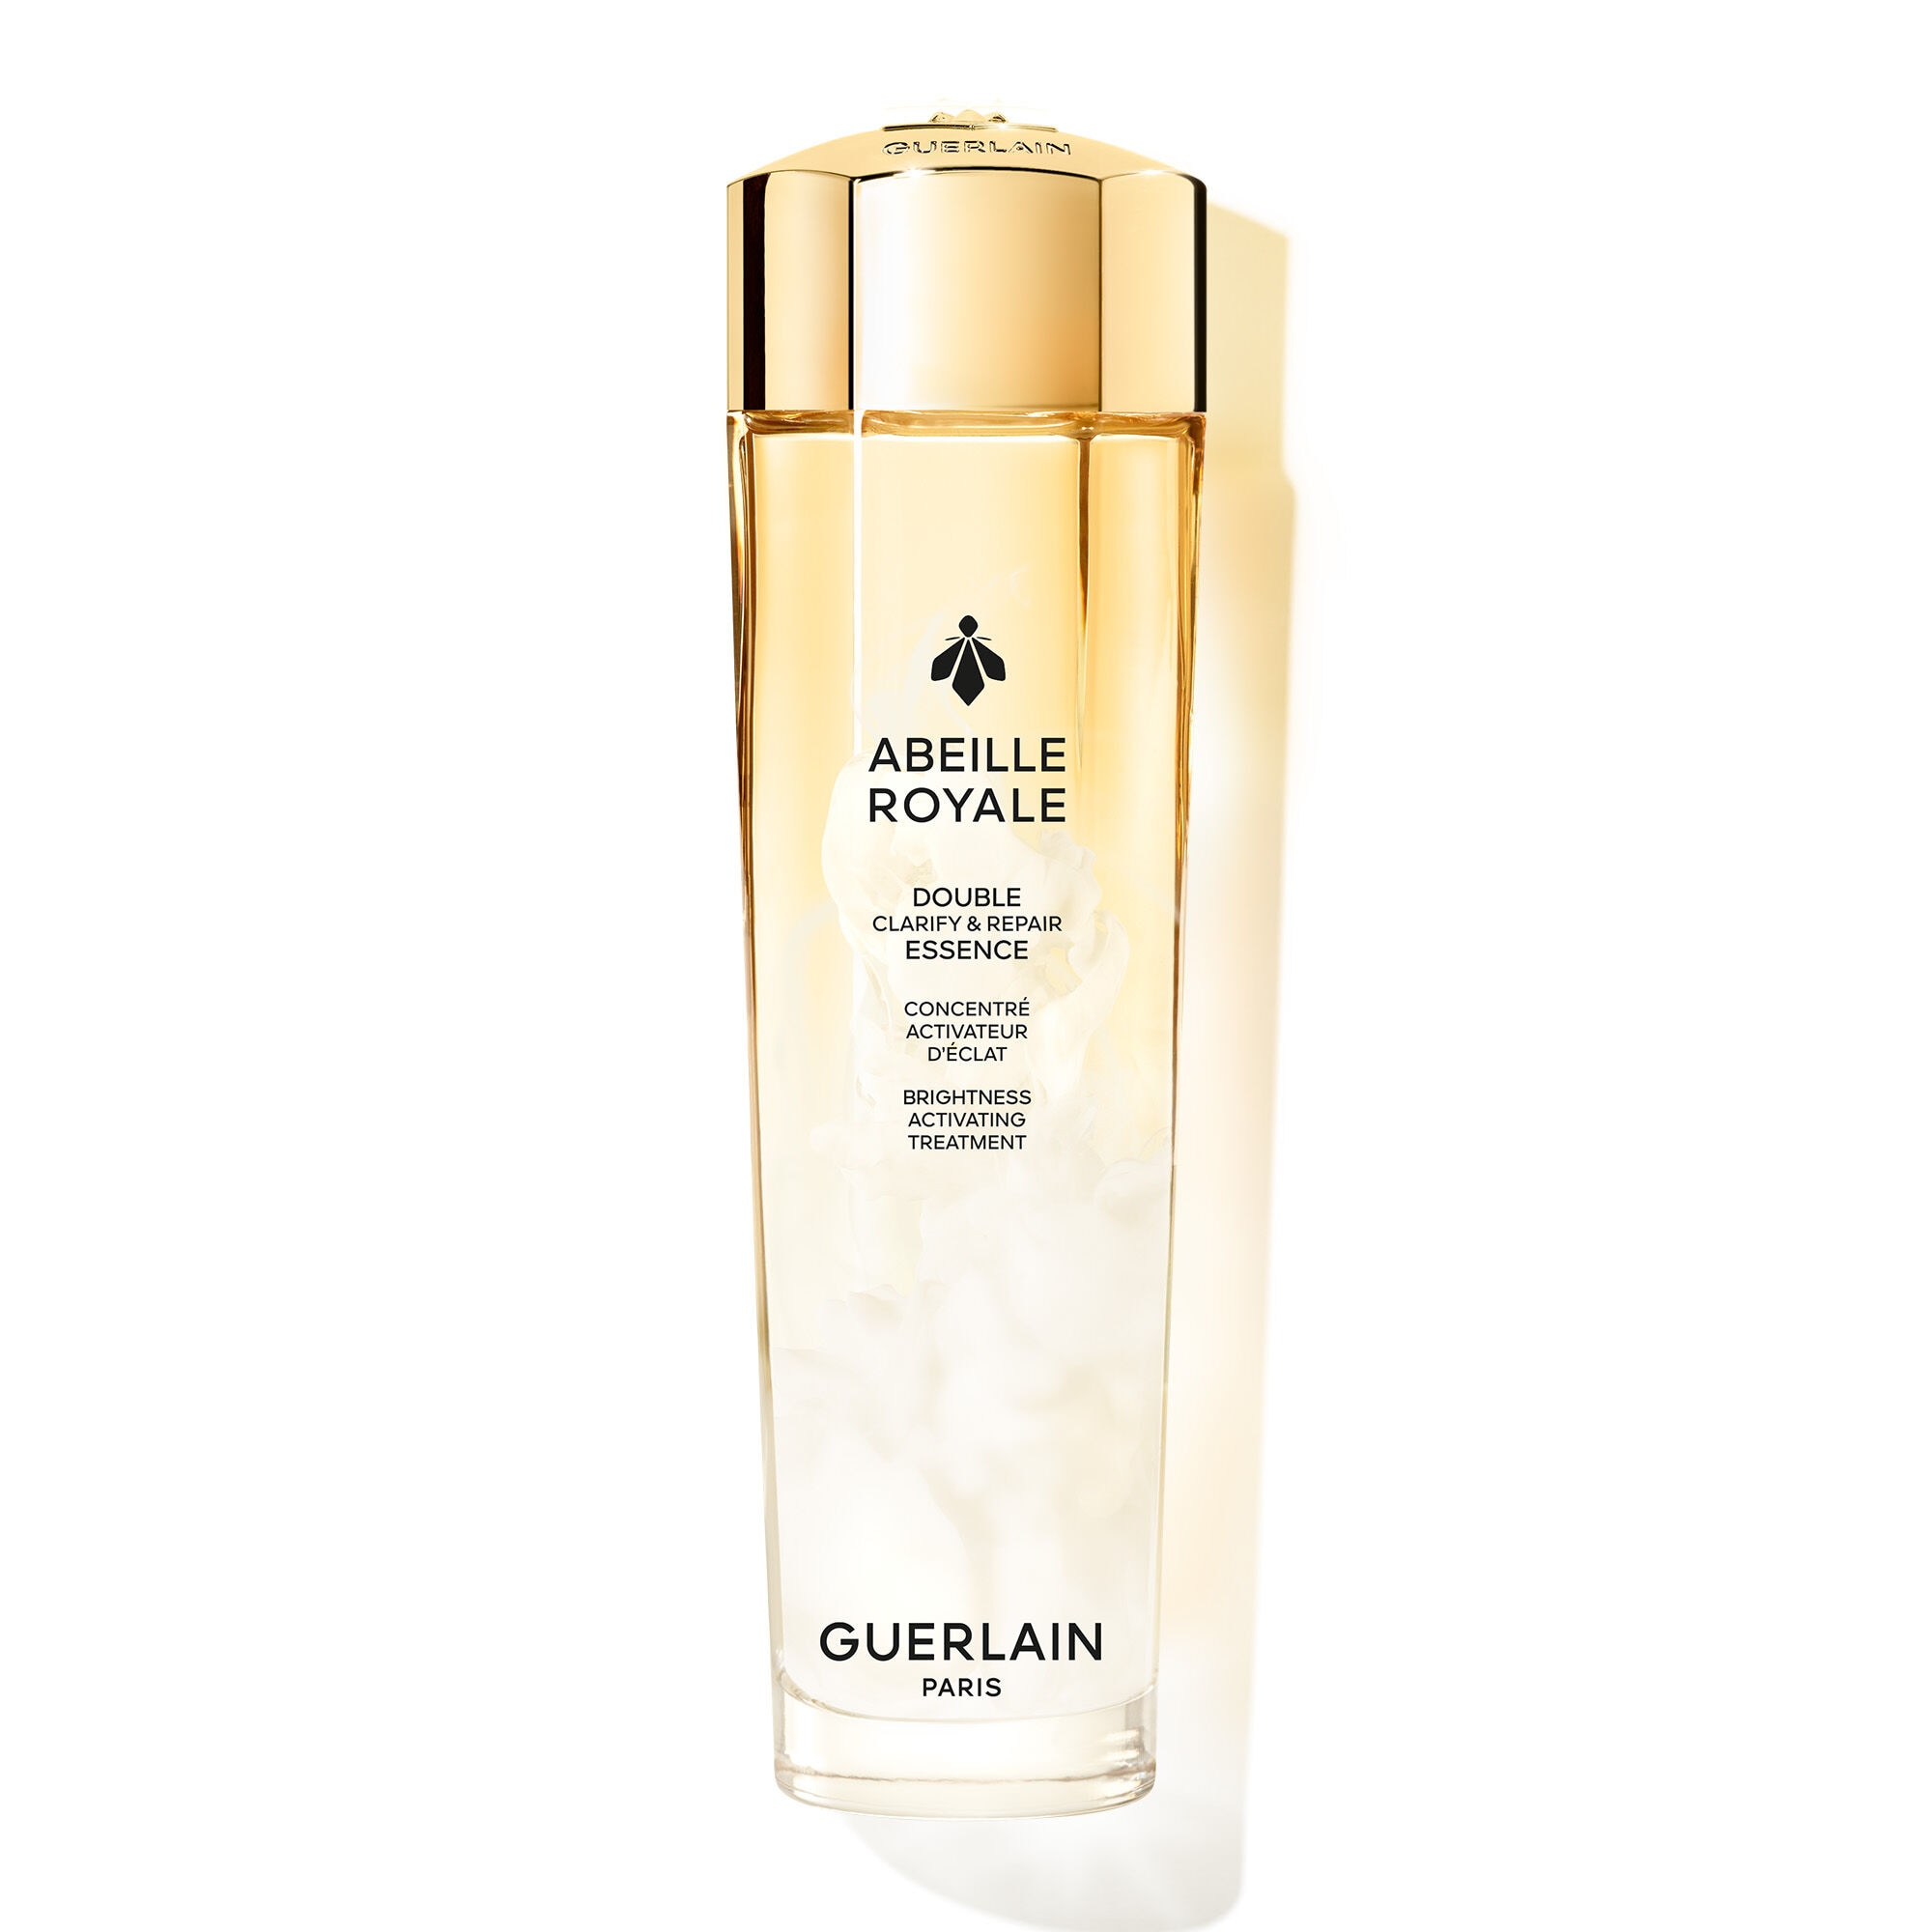 Luxury Skincare: Face Care & High End Skin Products ⋅ GUERLAIN